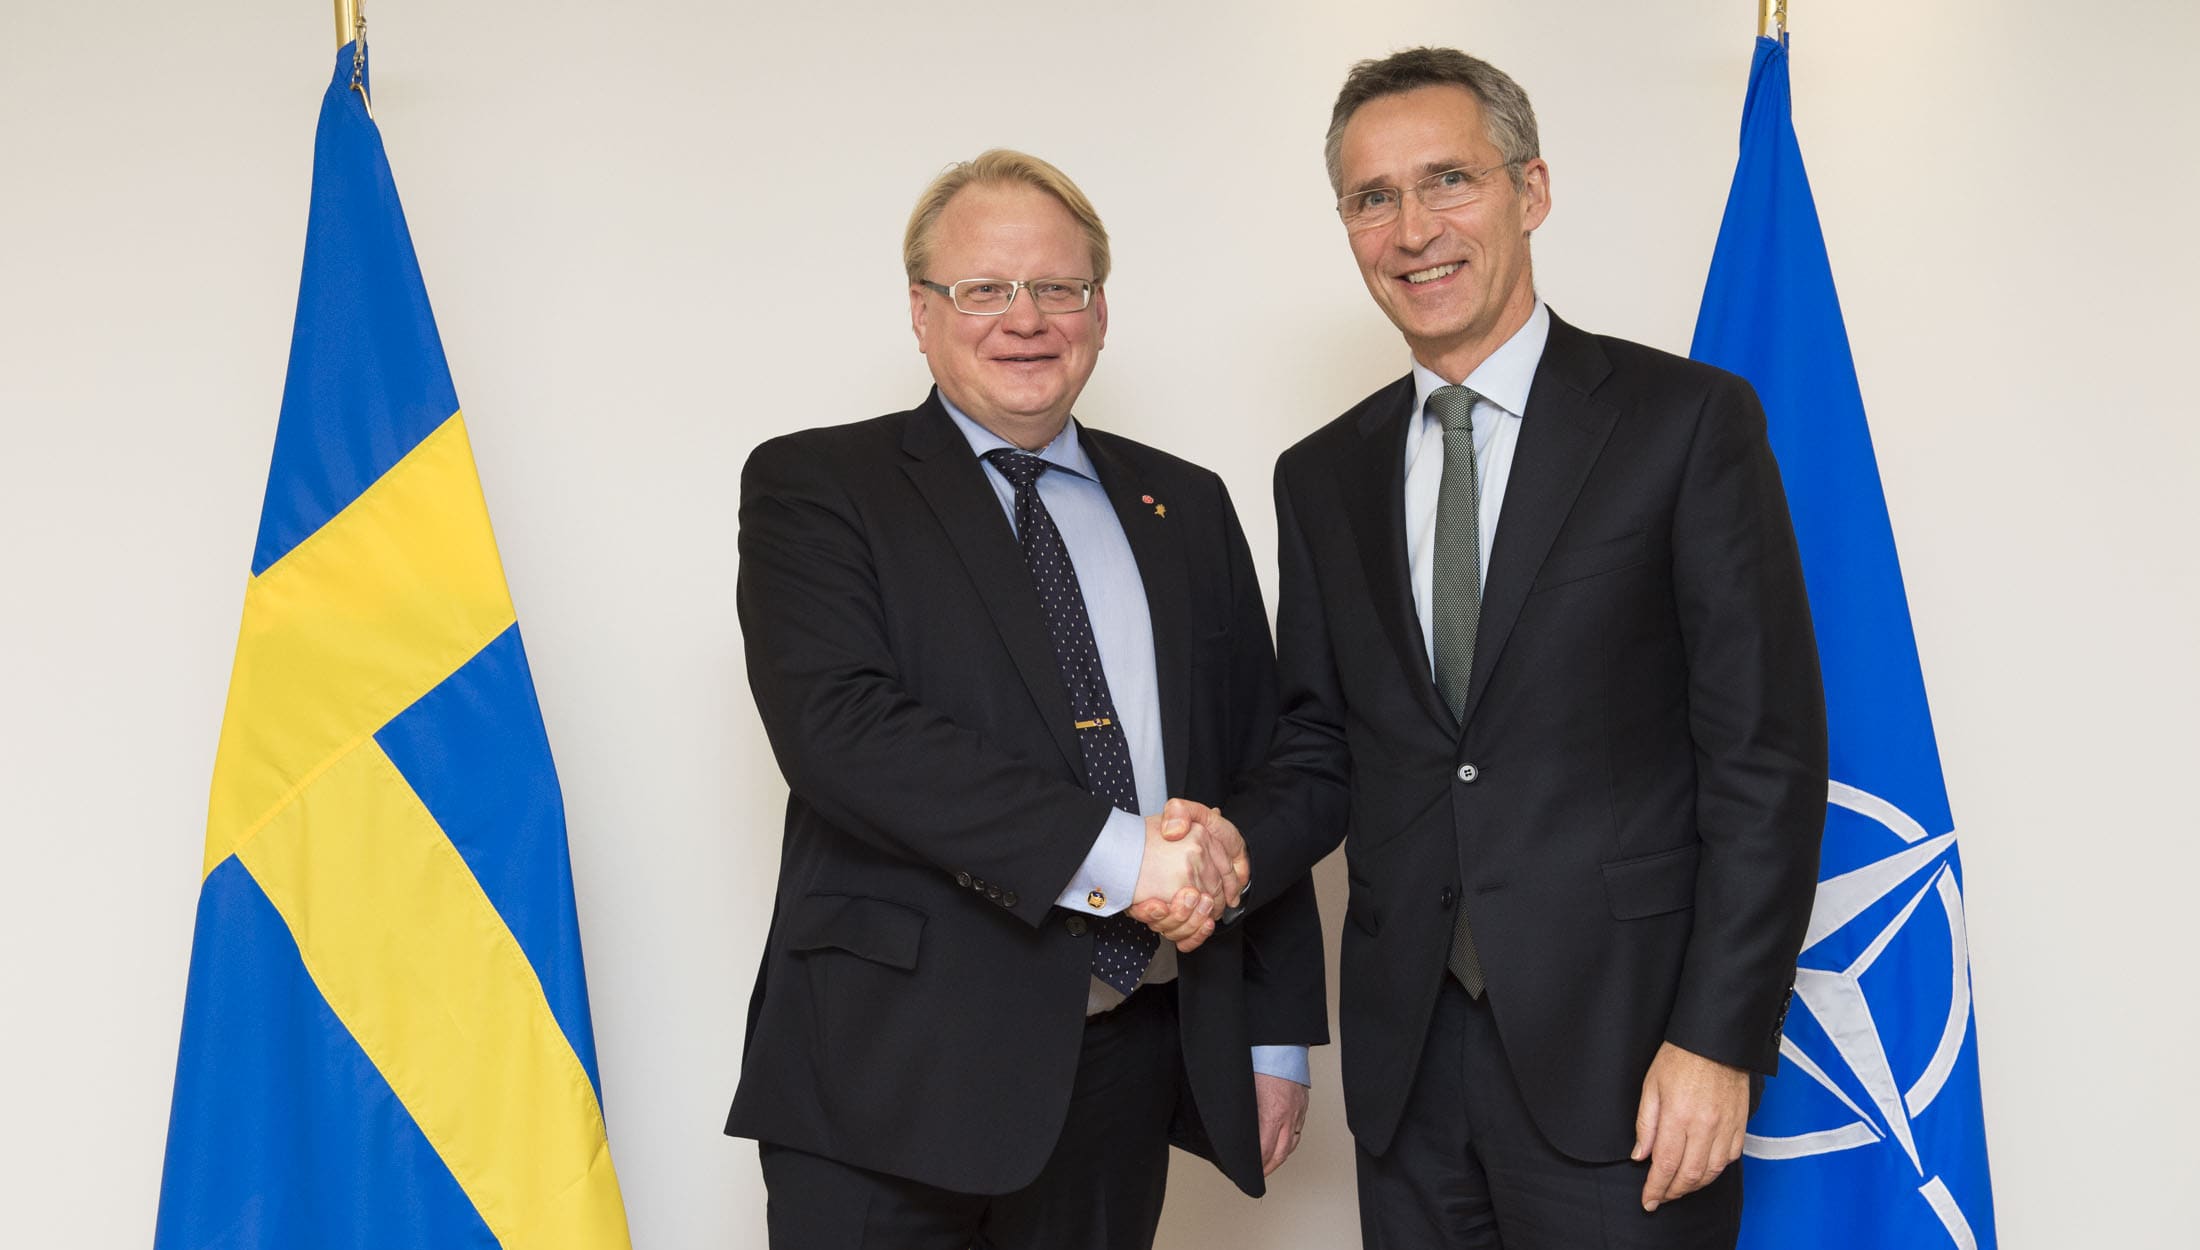 Sweden and NATO